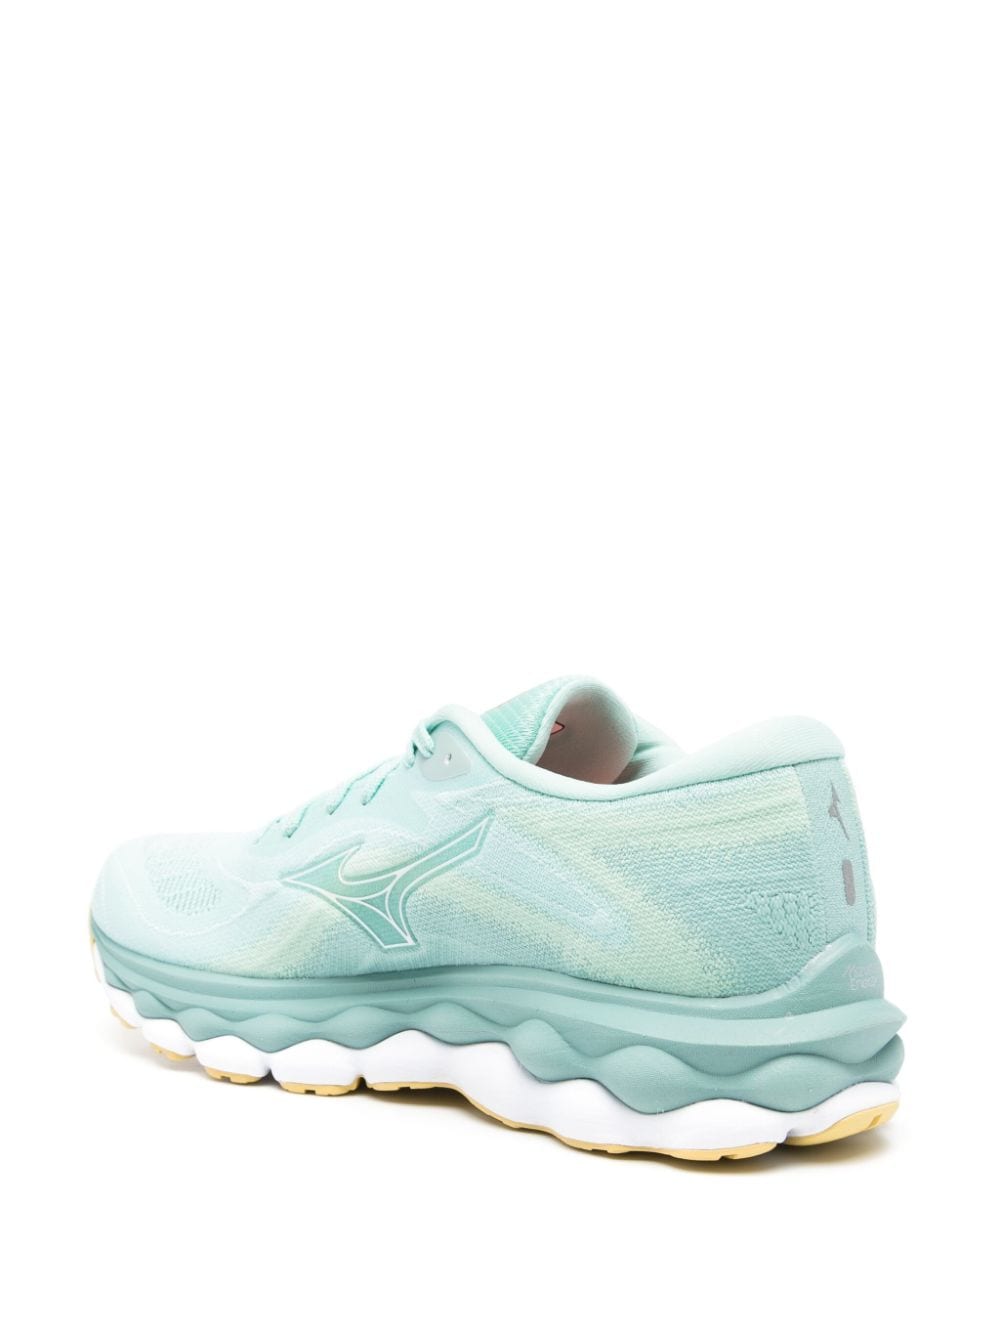 Wave Sky 7 knitted sneakers<BR/><BR/><BR/>